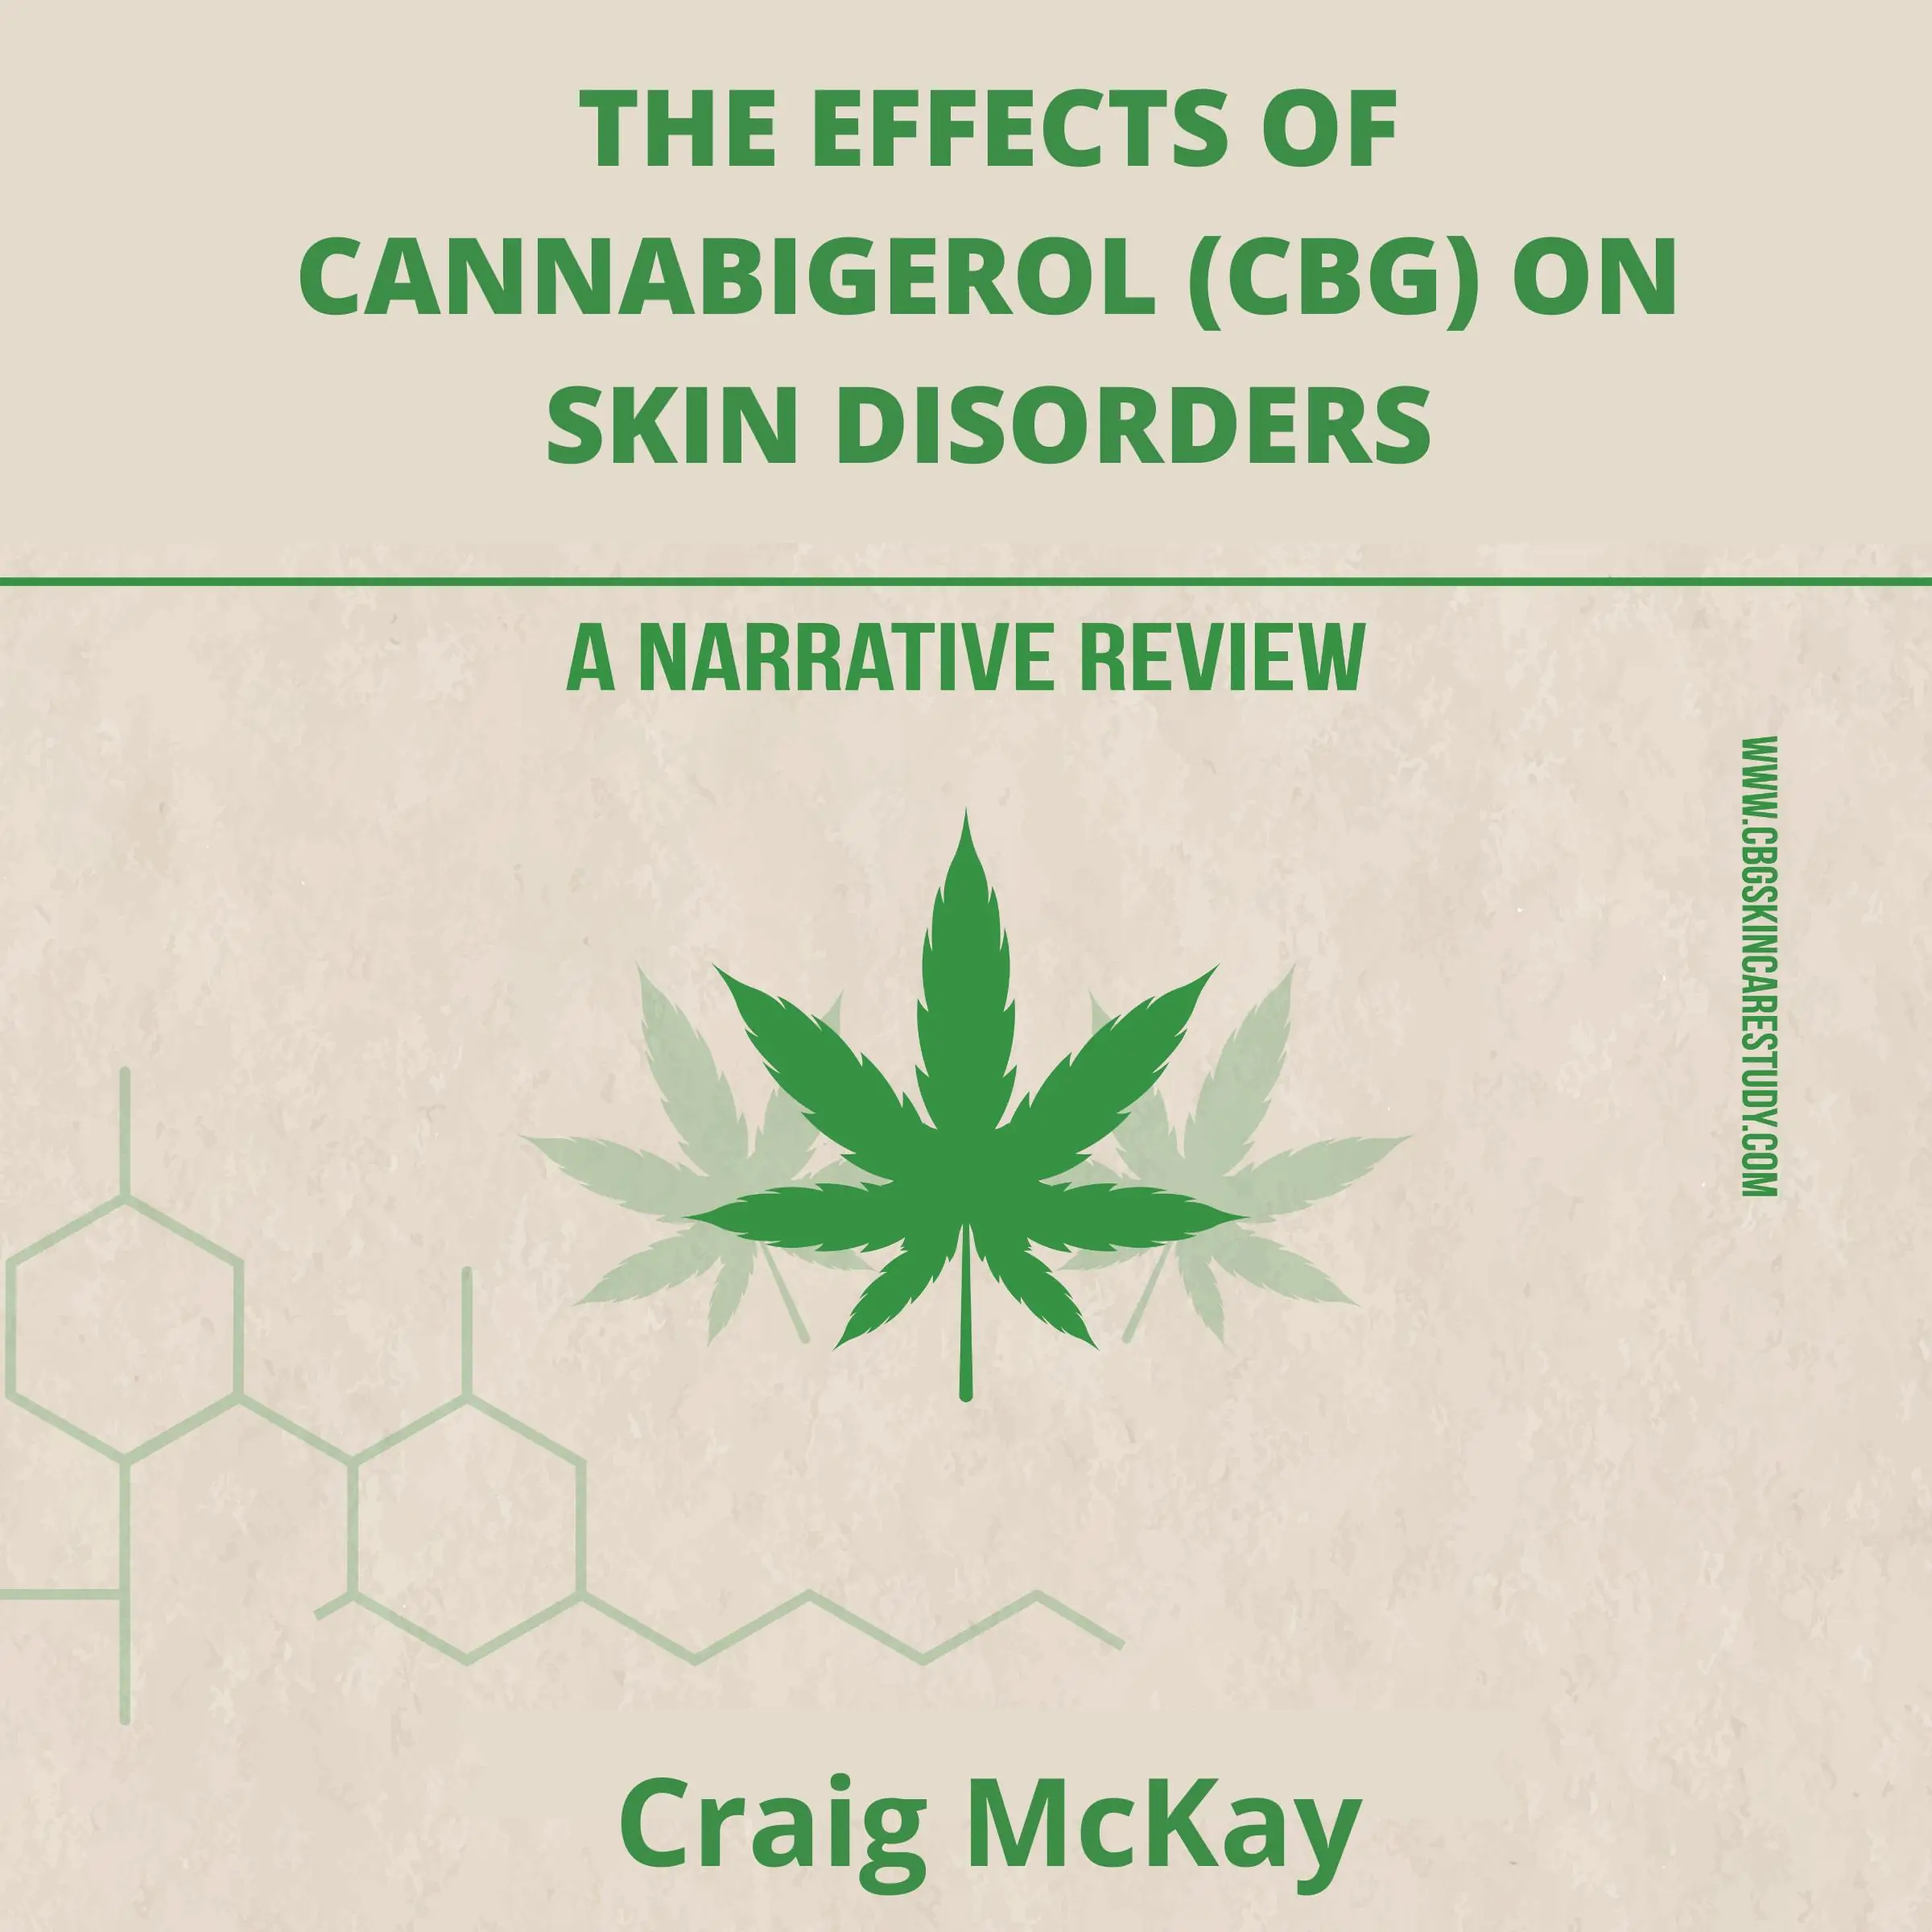 The effects of cannabigerol (CBG) on skin disorders: A narrative review Audiobook by Craig McKay